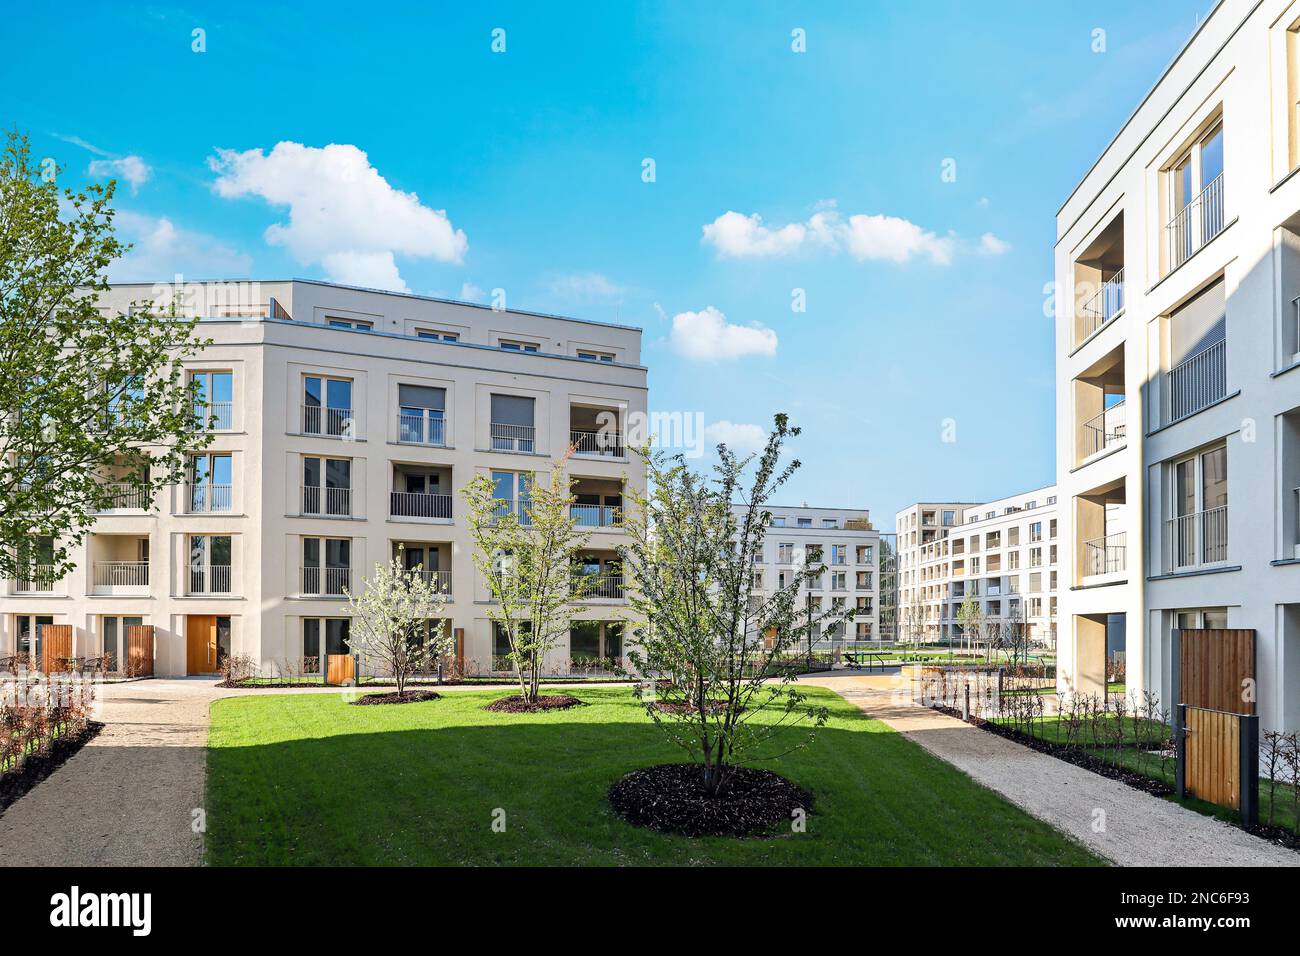 Residential area with ecological and sustainable green residential buildings, low-energy houses with apartments and green courtyard Stock Photo